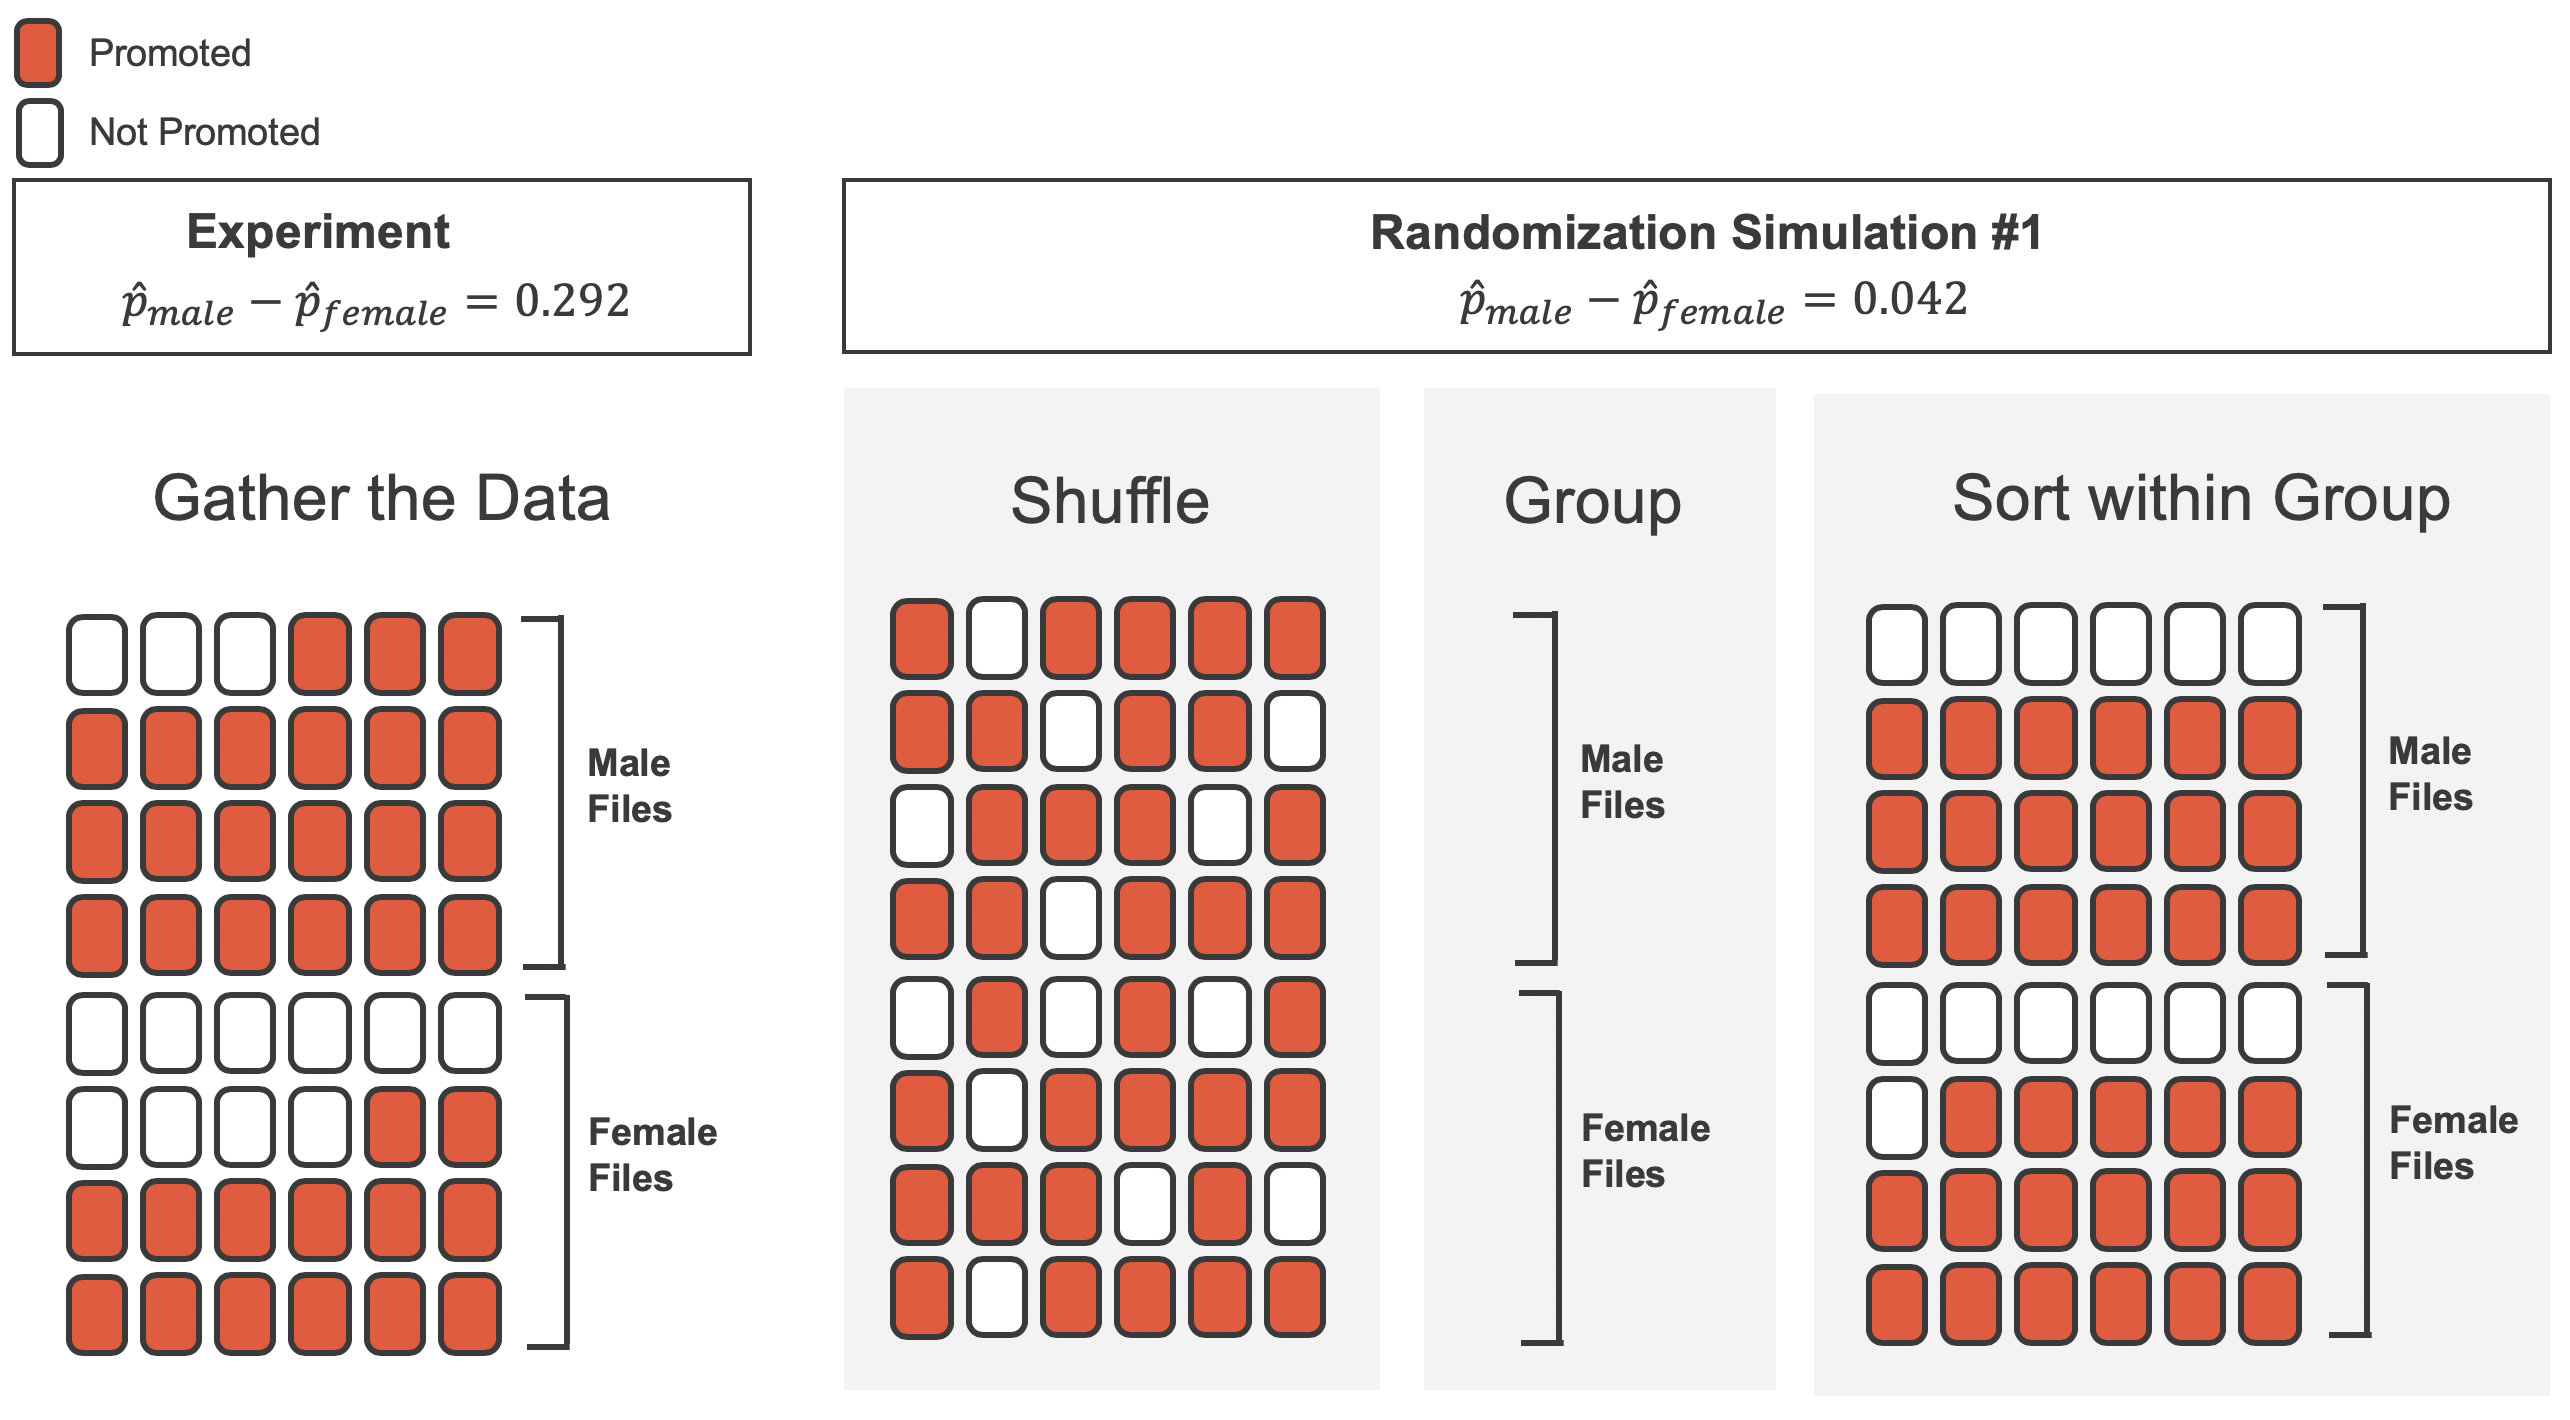 We summarize the randomized data to produce one estimate of the difference in proportions given no gender discrimination.